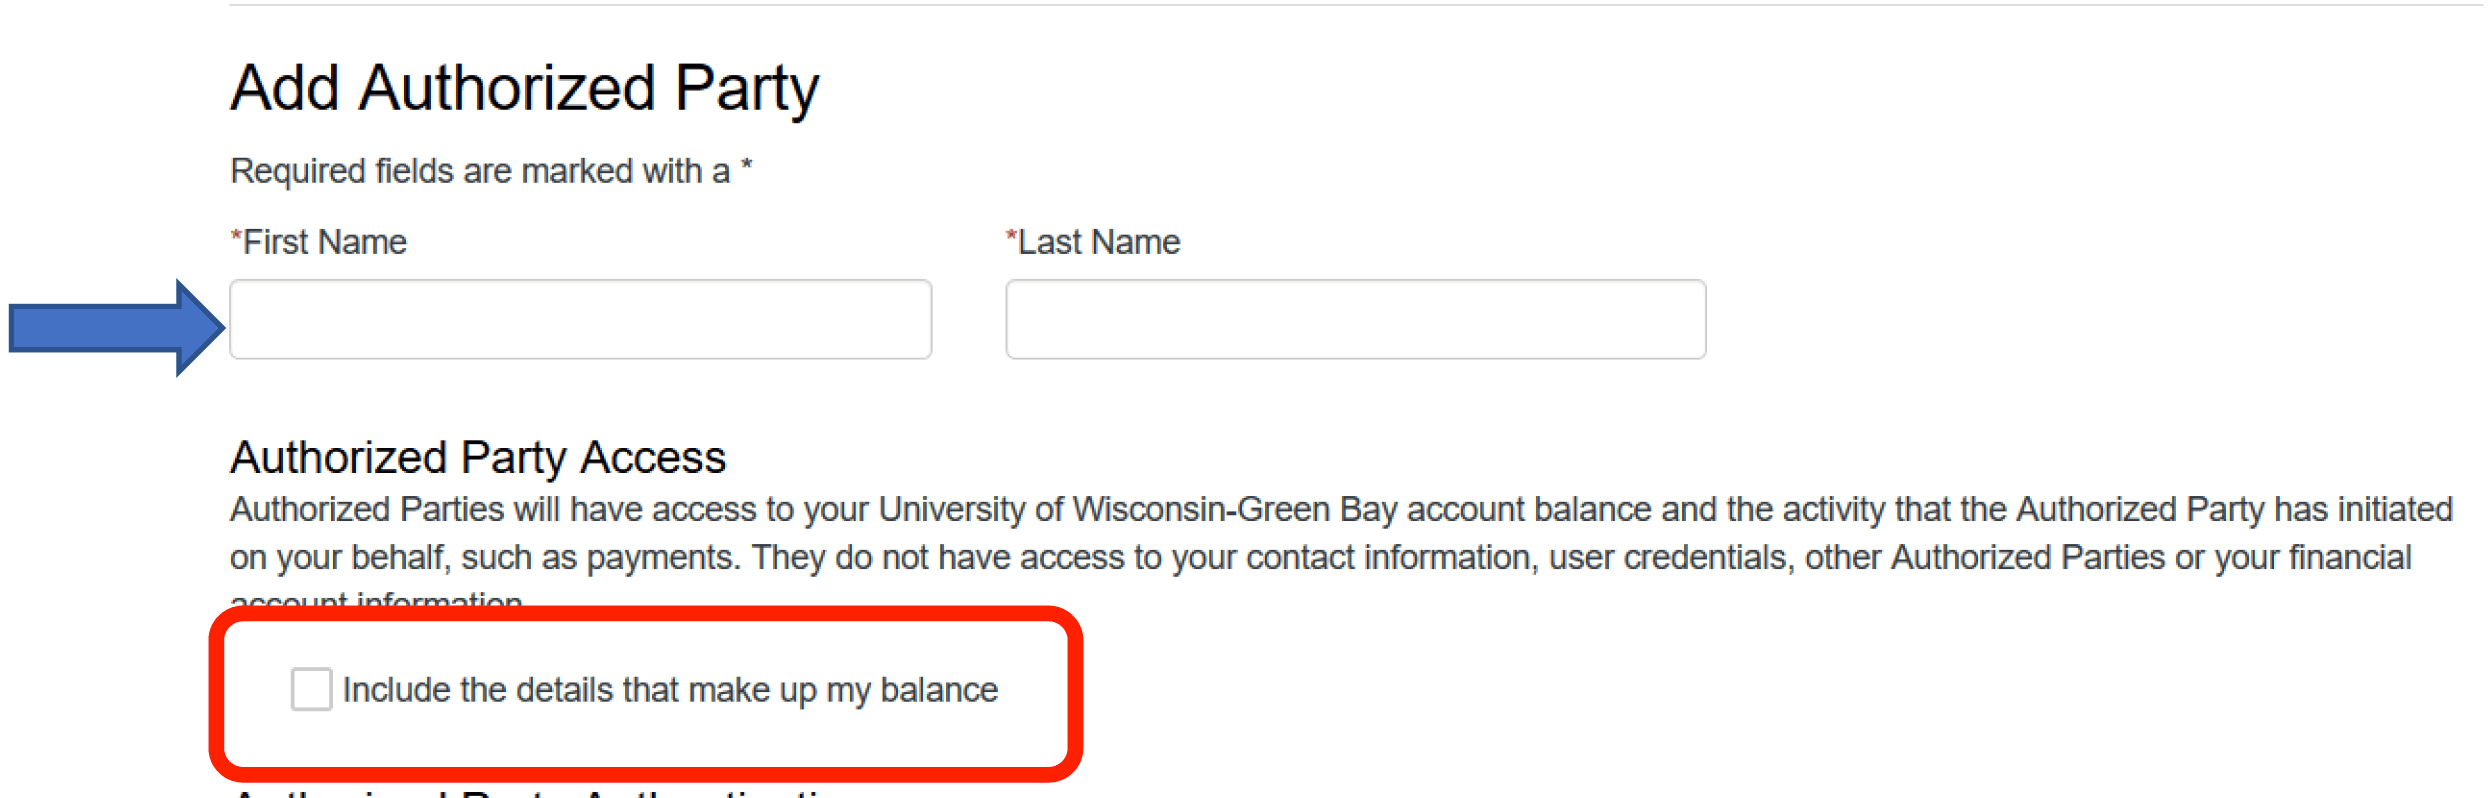 Add Authorized Party screen with arrow pointing to First Name and Last Name form fields and checkbox to "include the details tha tmake up my balance" circled